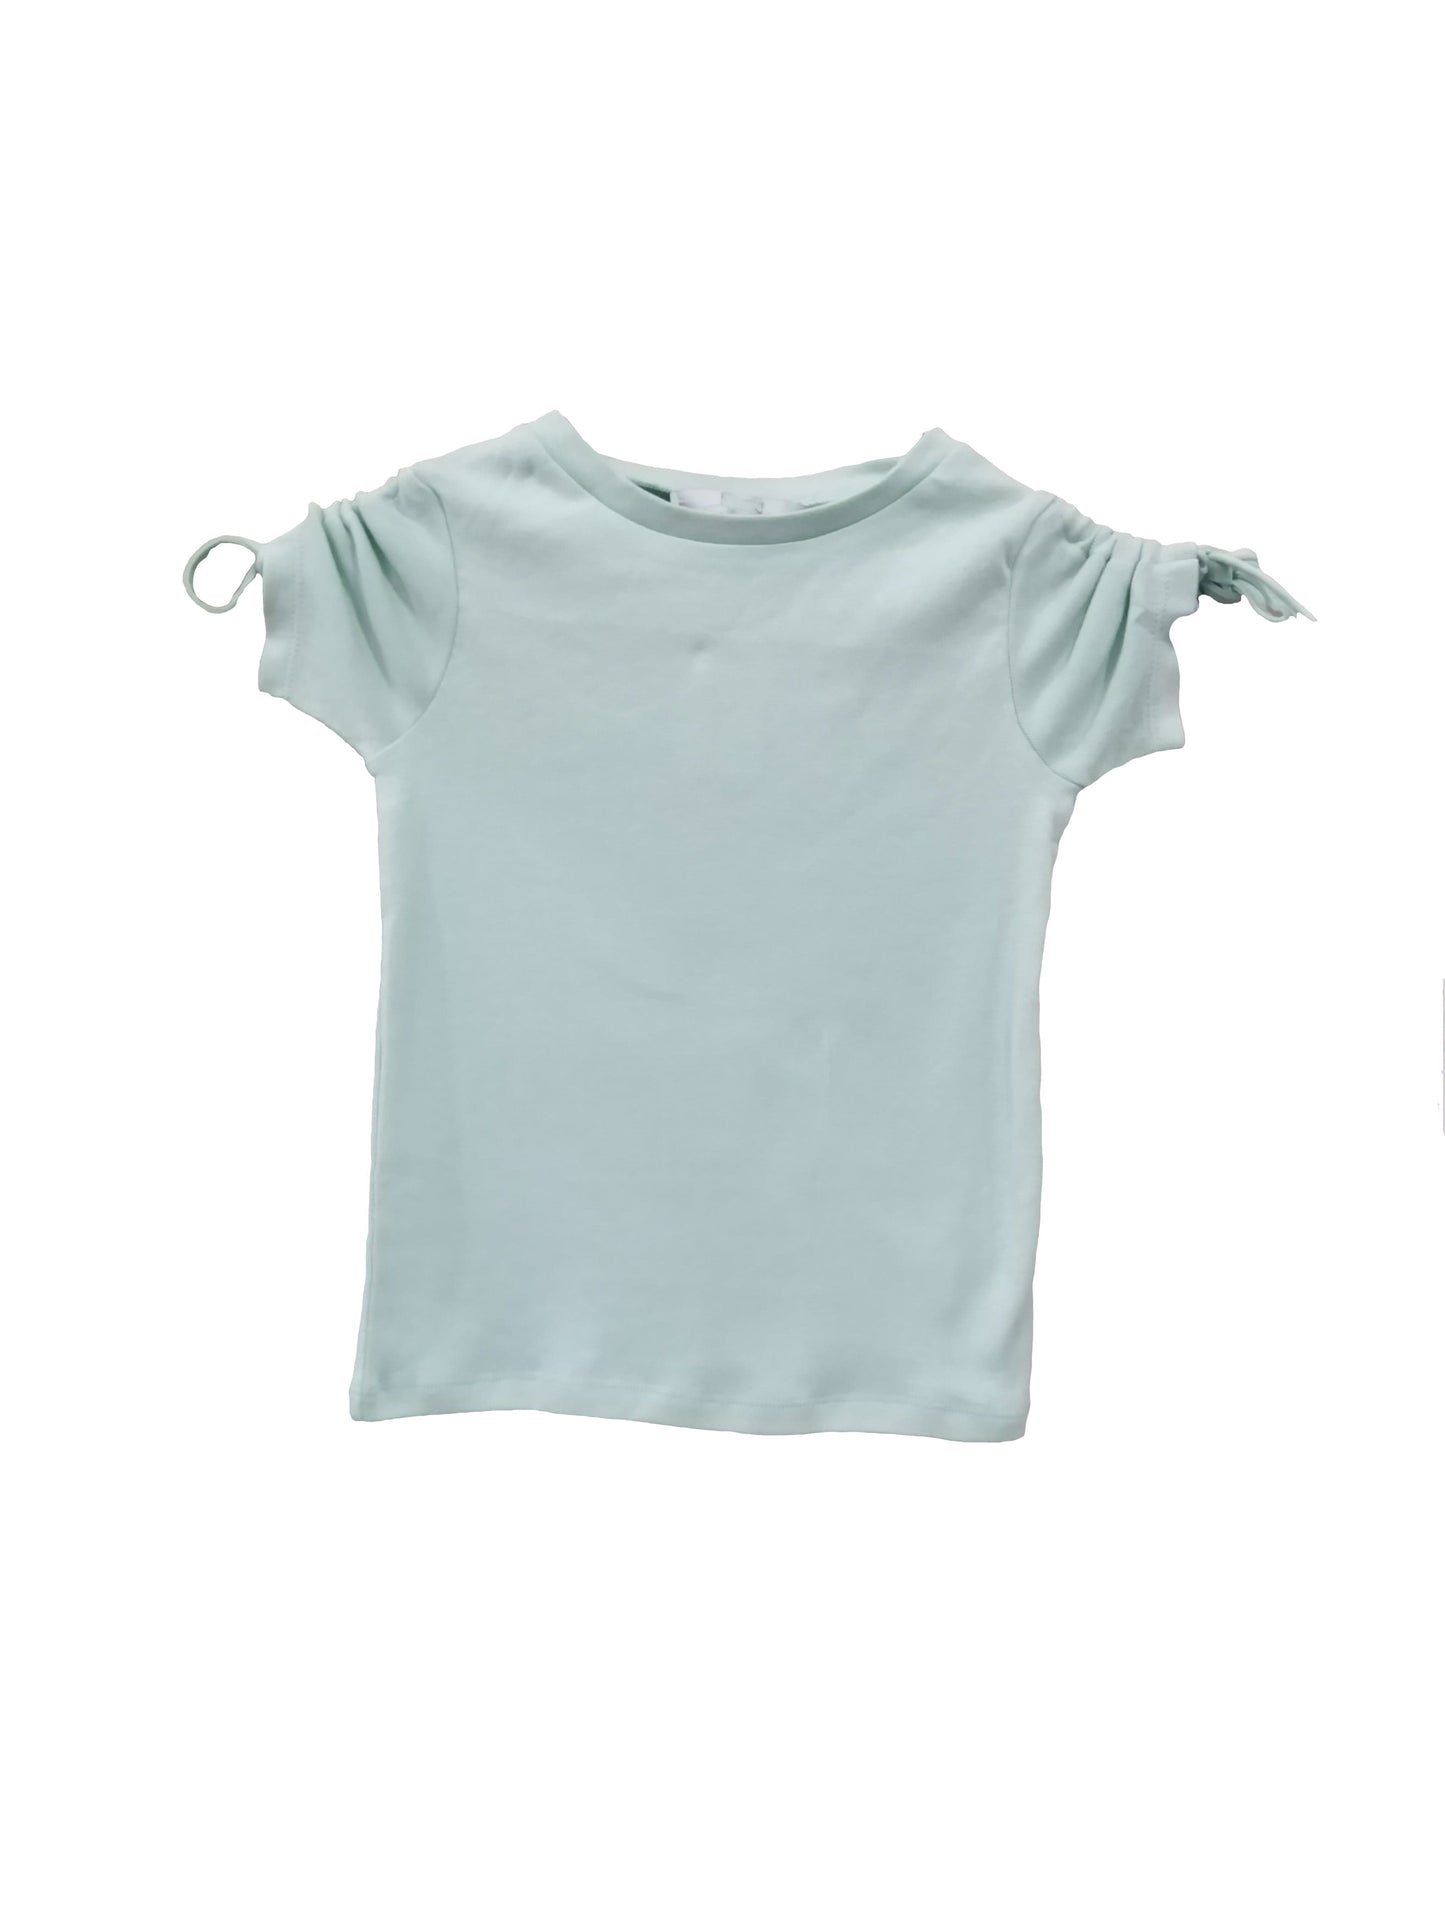 BRANDS & BEYOND Girls Tops Girl's Rushed Sleeves T-shirt